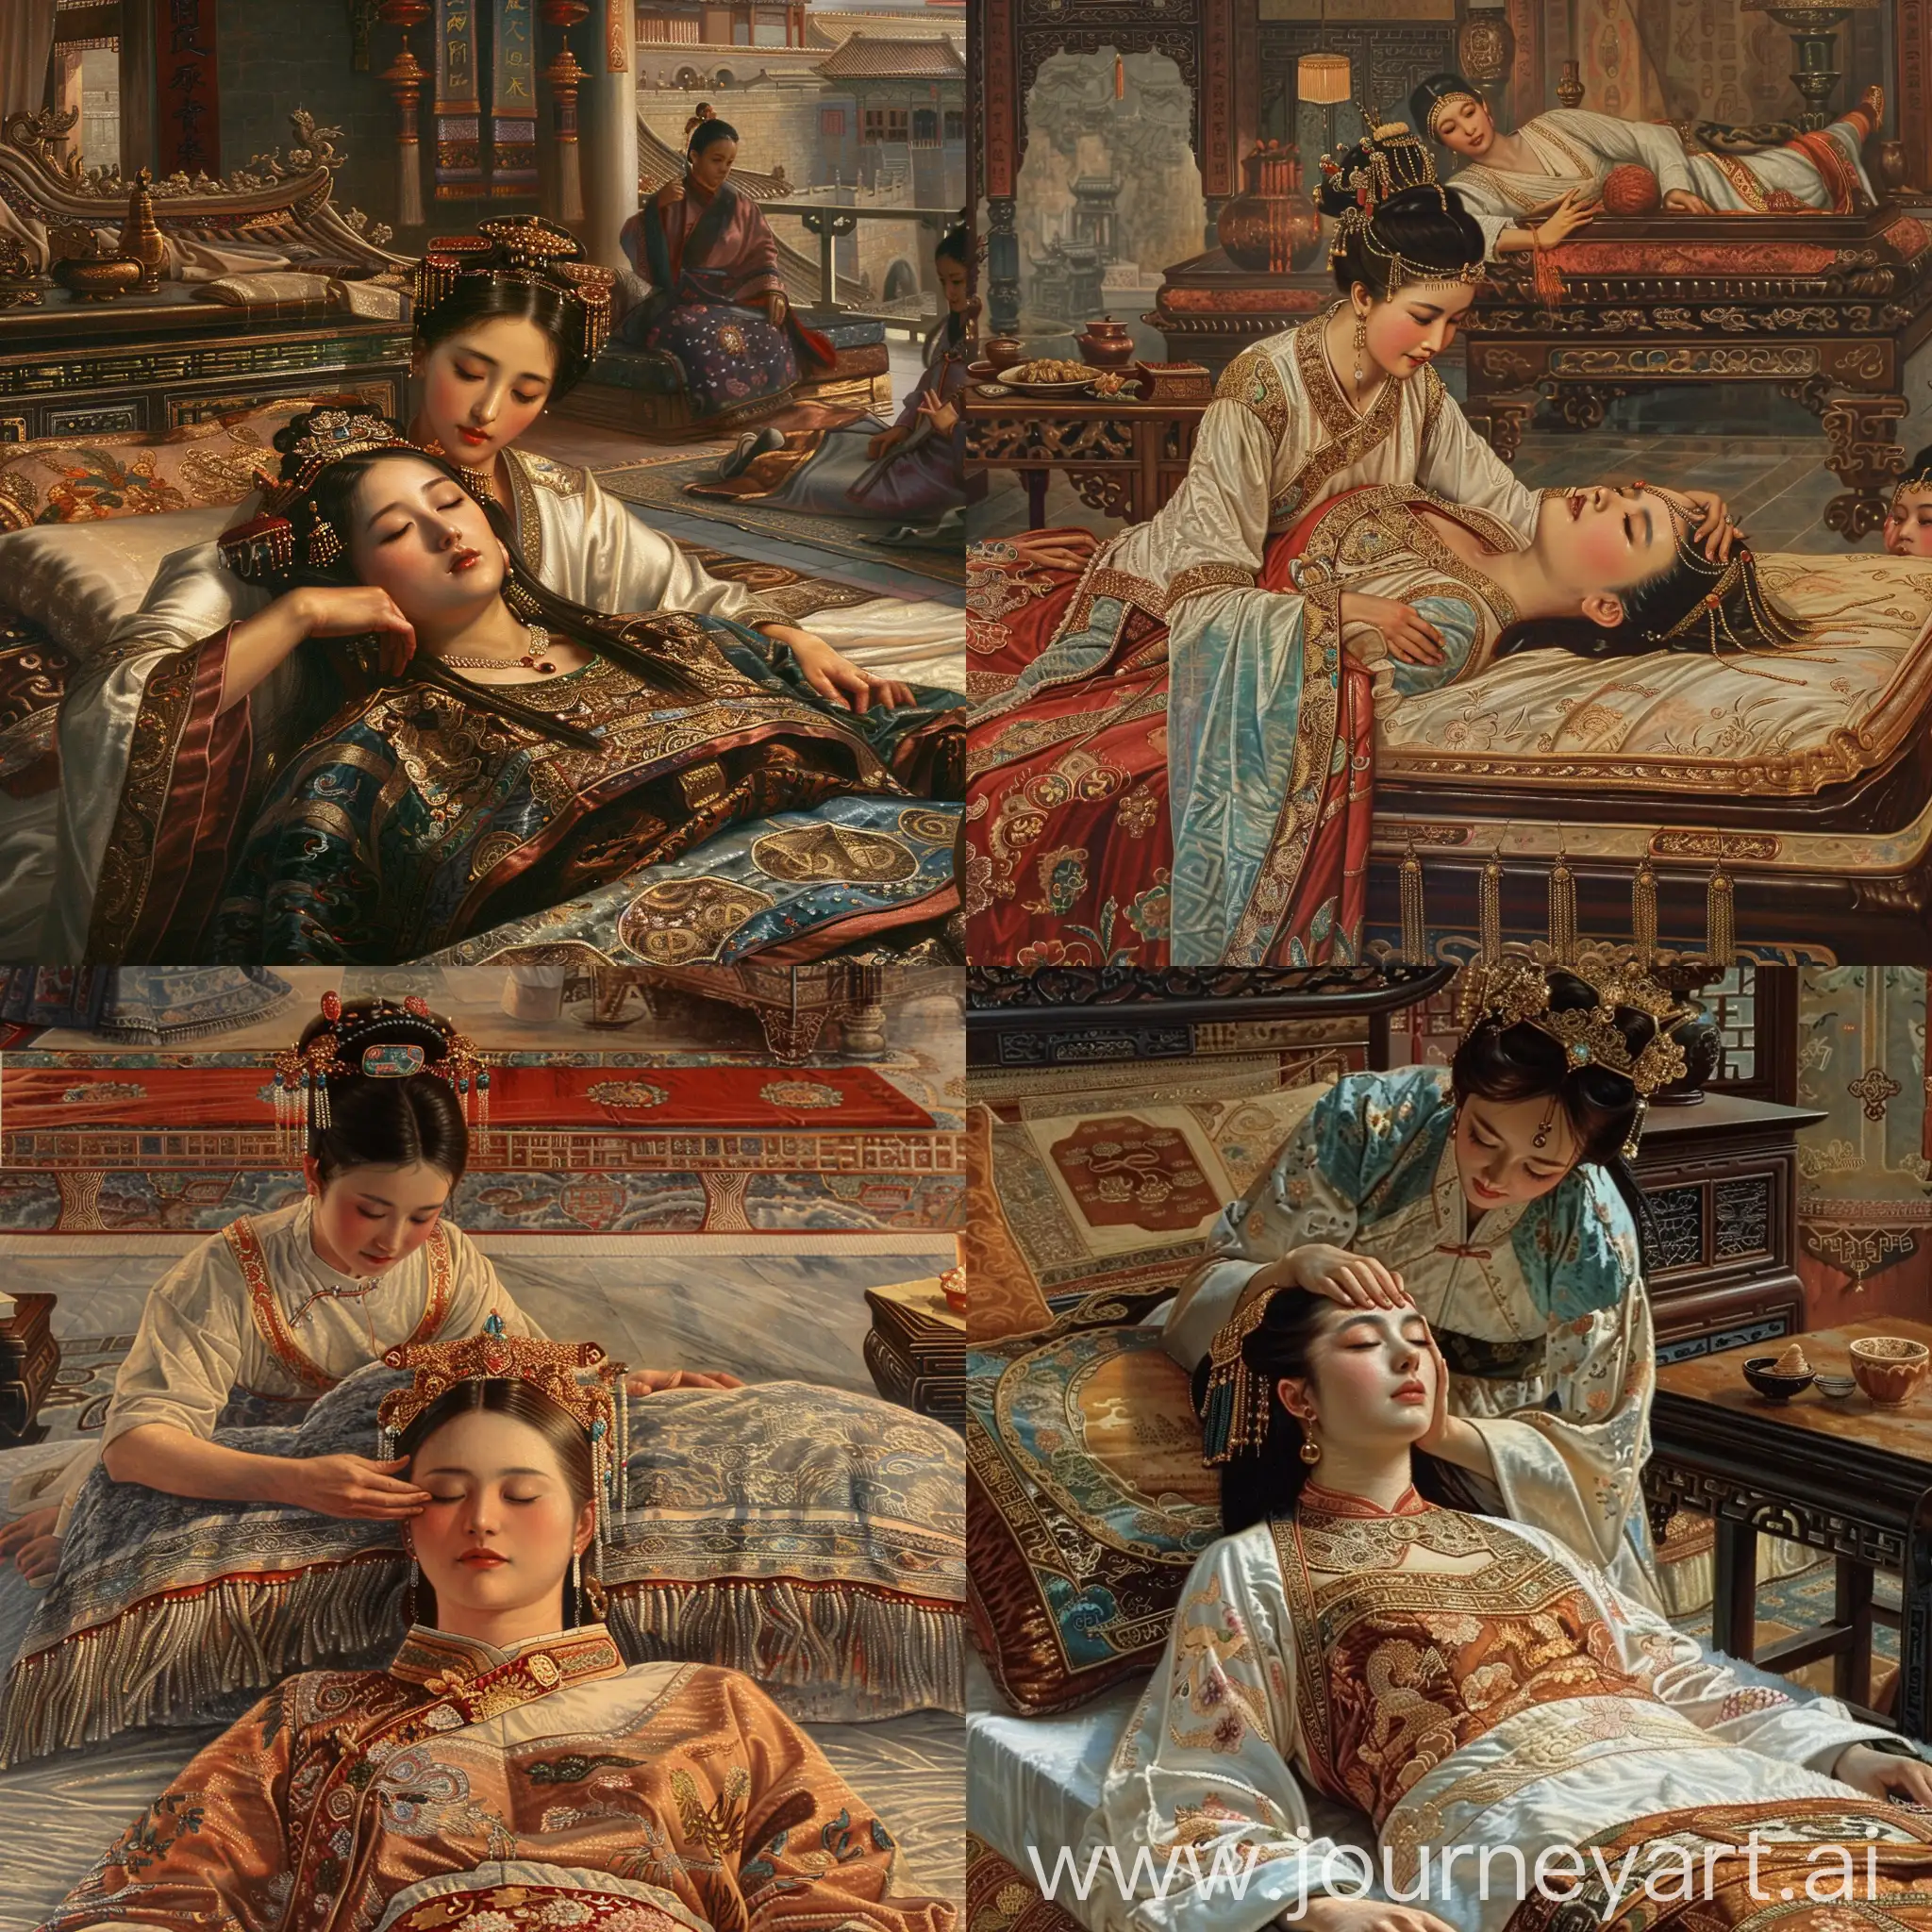 Luxurious-Chinese-Empress-Receives-Head-Massage-in-Magnificent-Scene